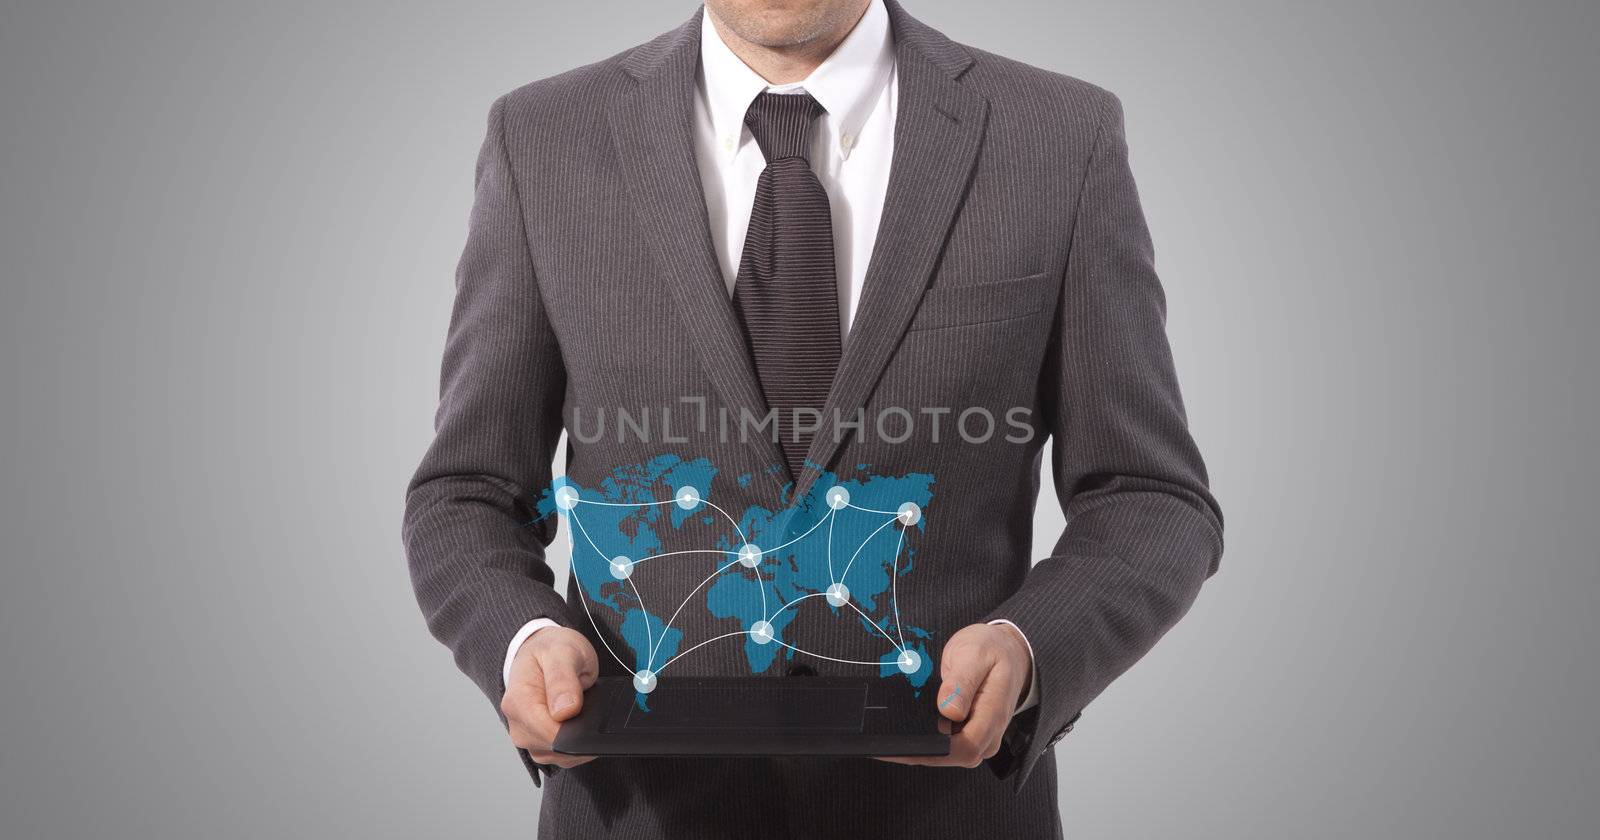 business man with touch tablet in hands, grey background. world map from www.lib.utexas.edu